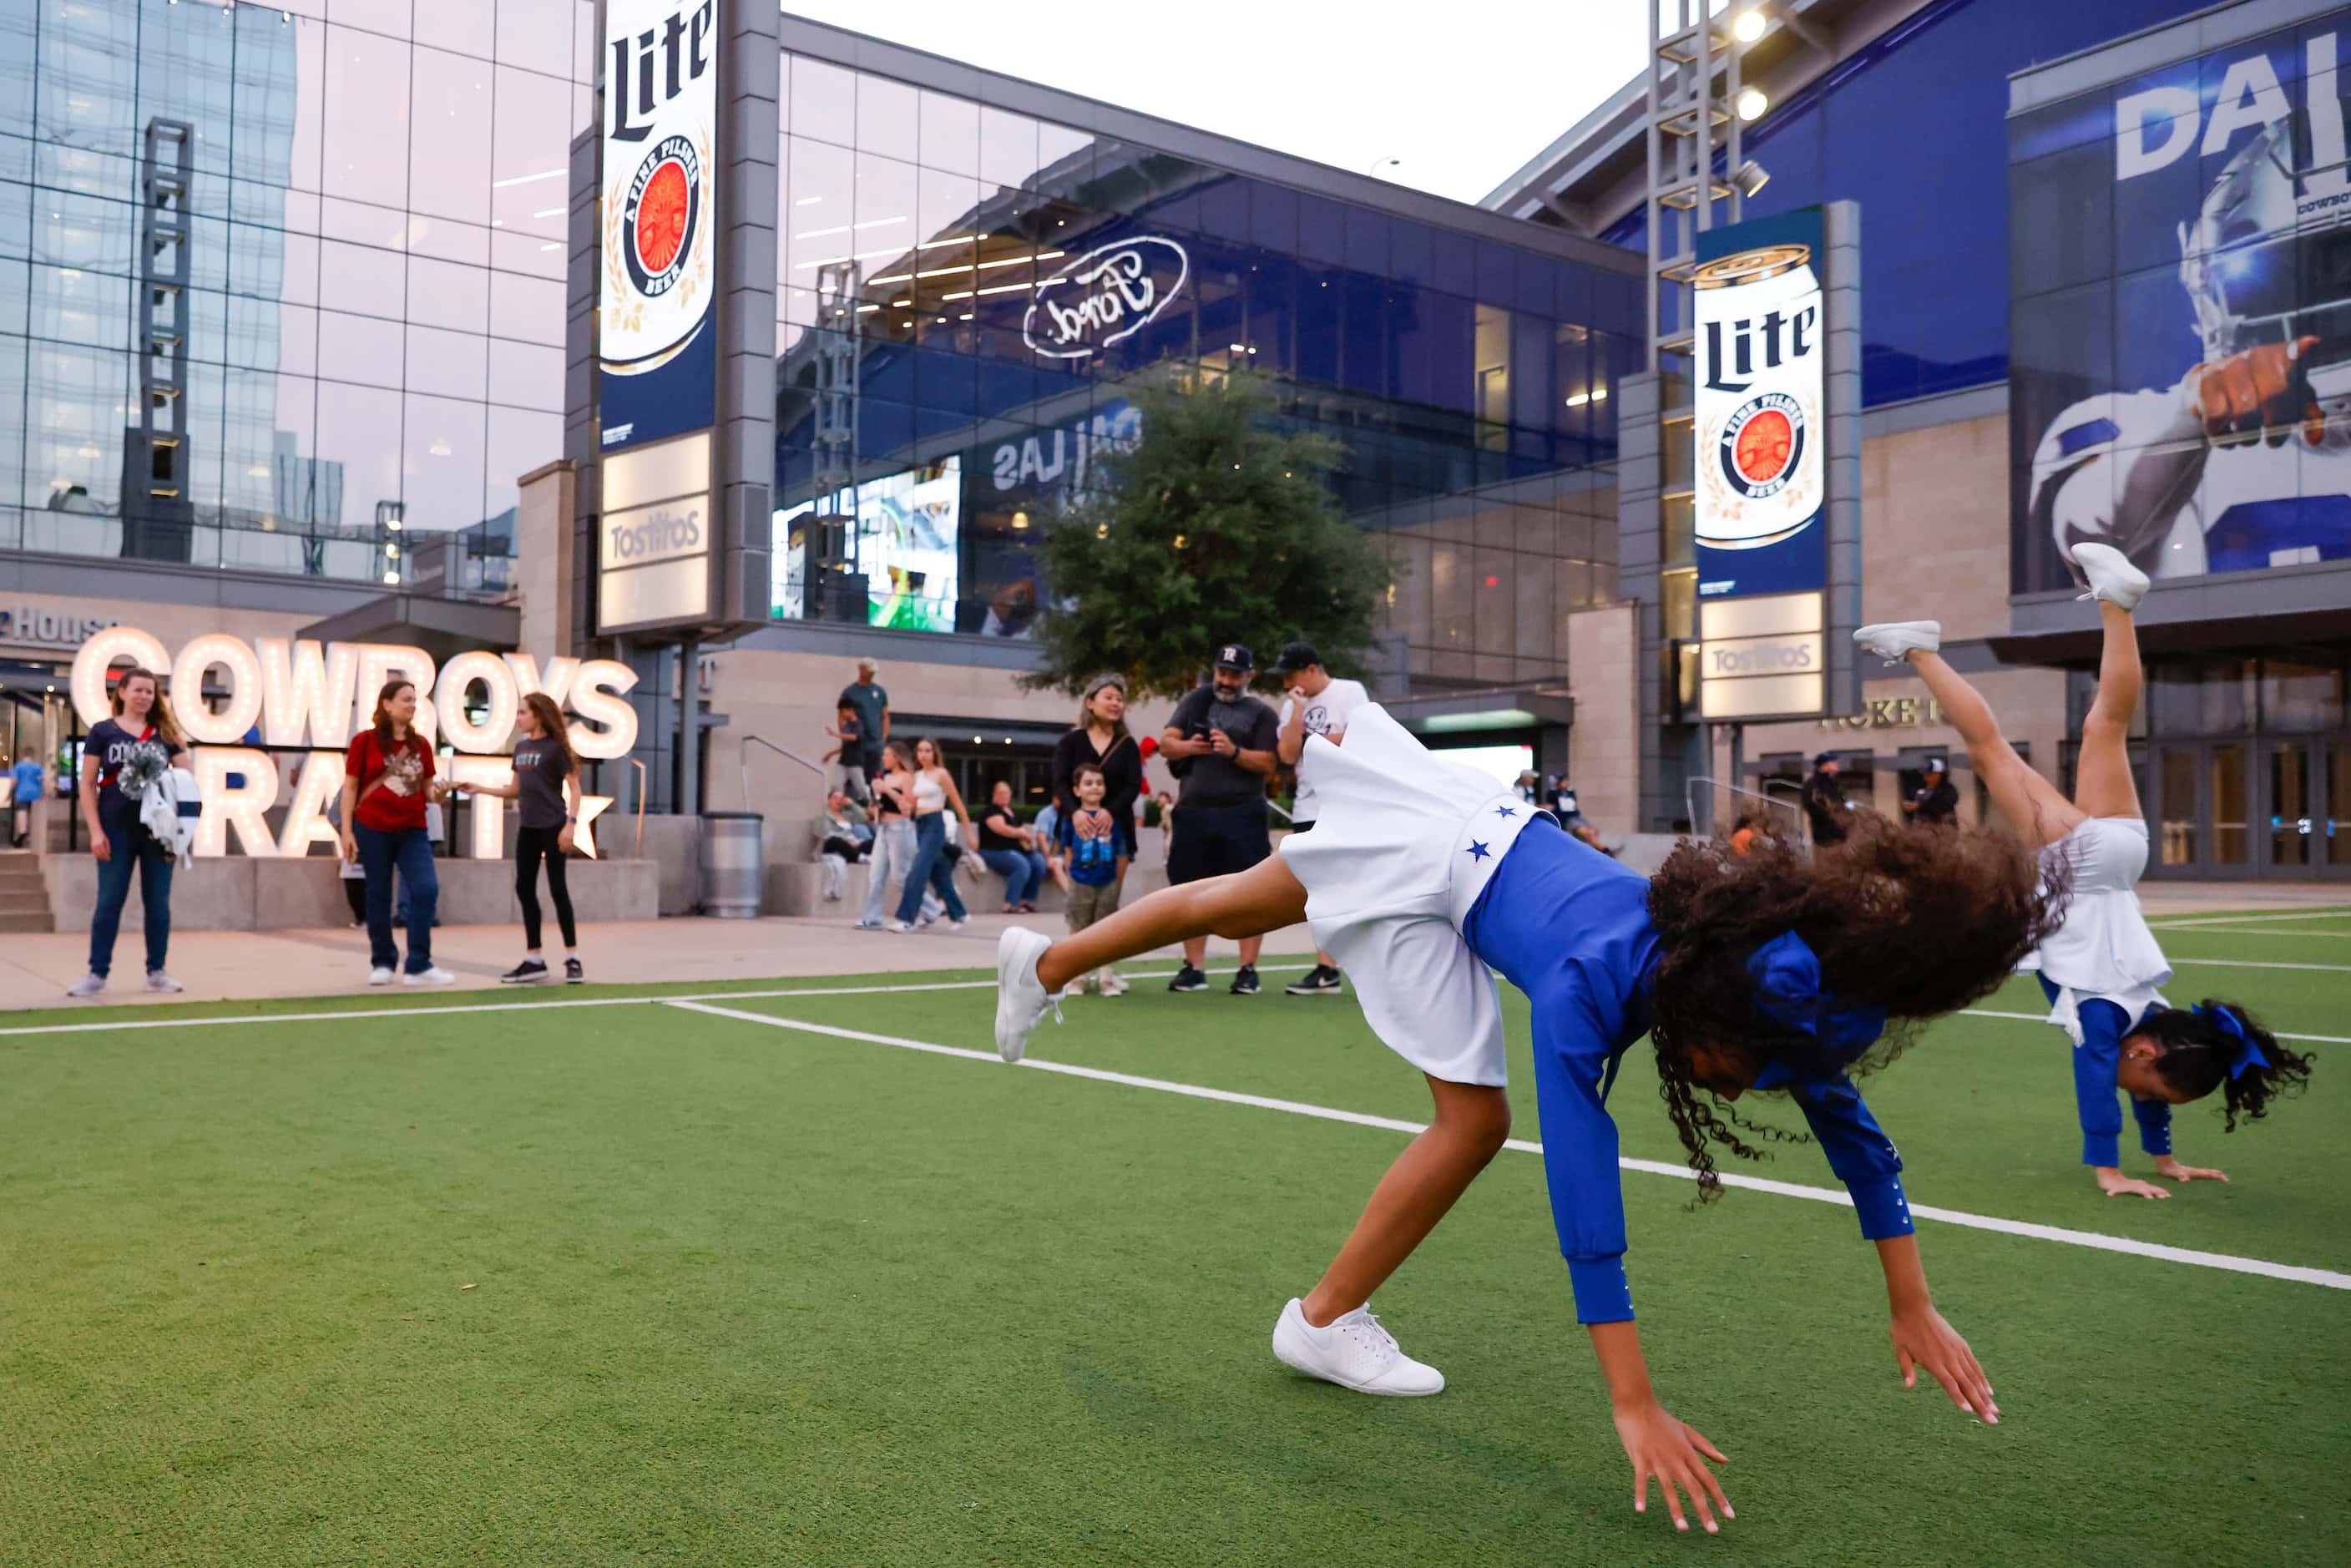 Junior Dallas Cowboy Cheerleaders play around the turf in the second round of the NFL Draft...